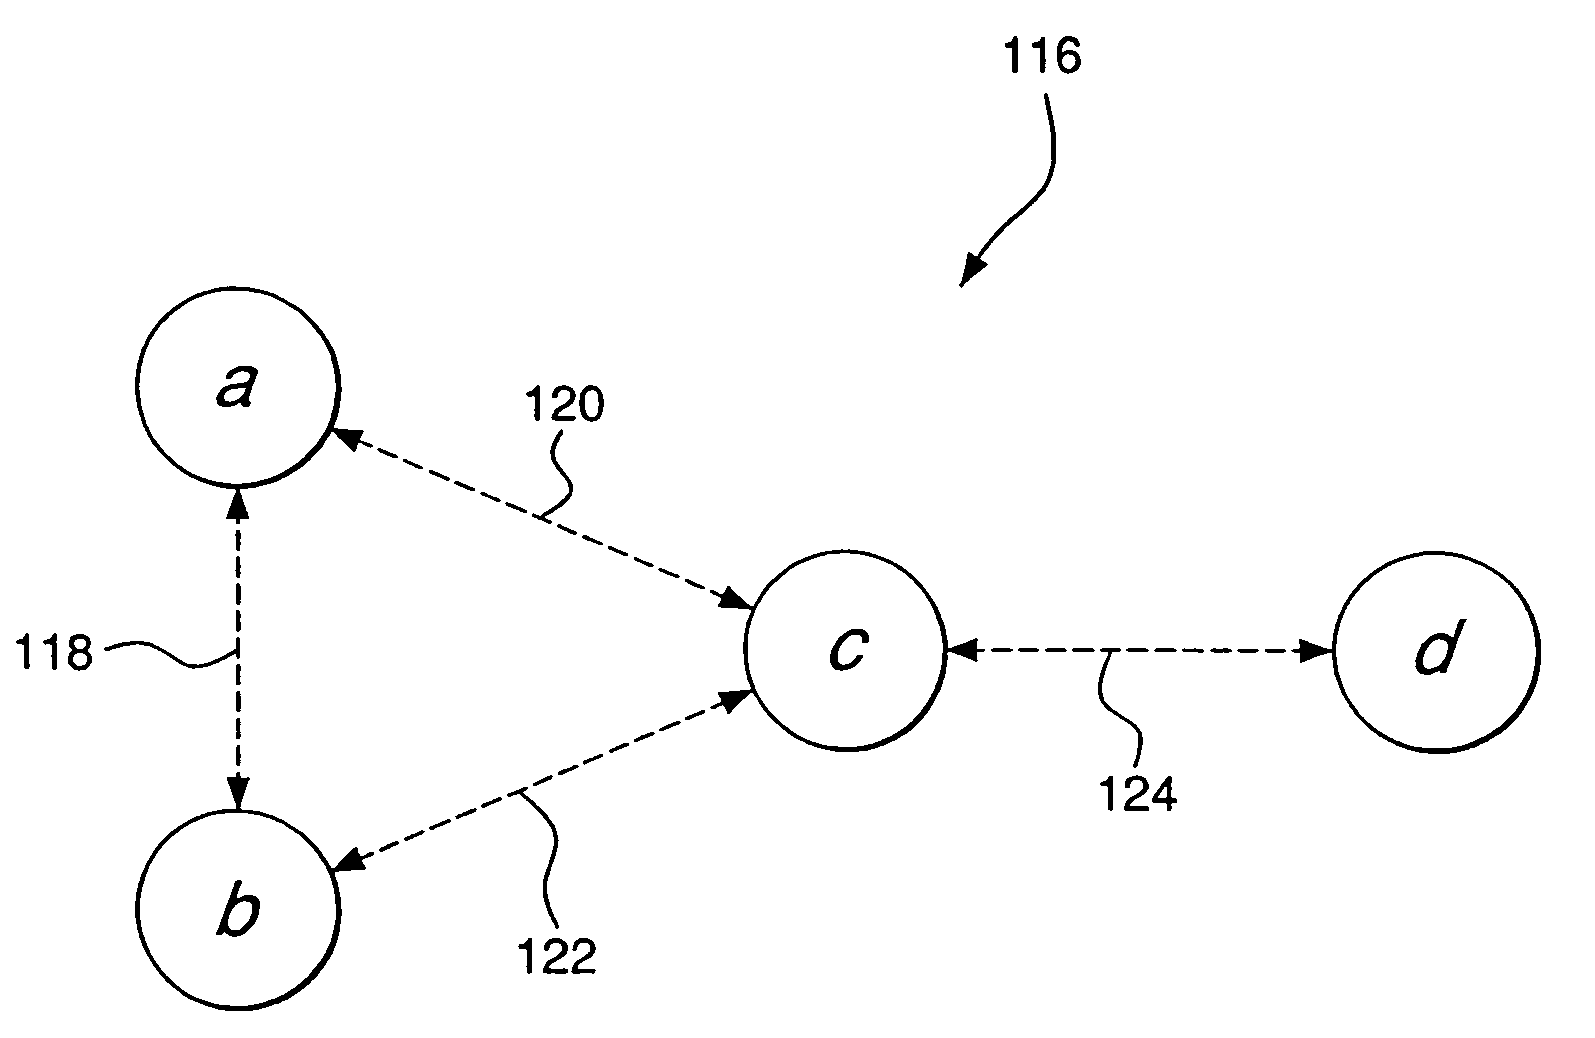 System and method for identifying potential hidden node problems in multi-hop wireless ad-hoc networks for the purpose of avoiding such potentially problem nodes in route selection